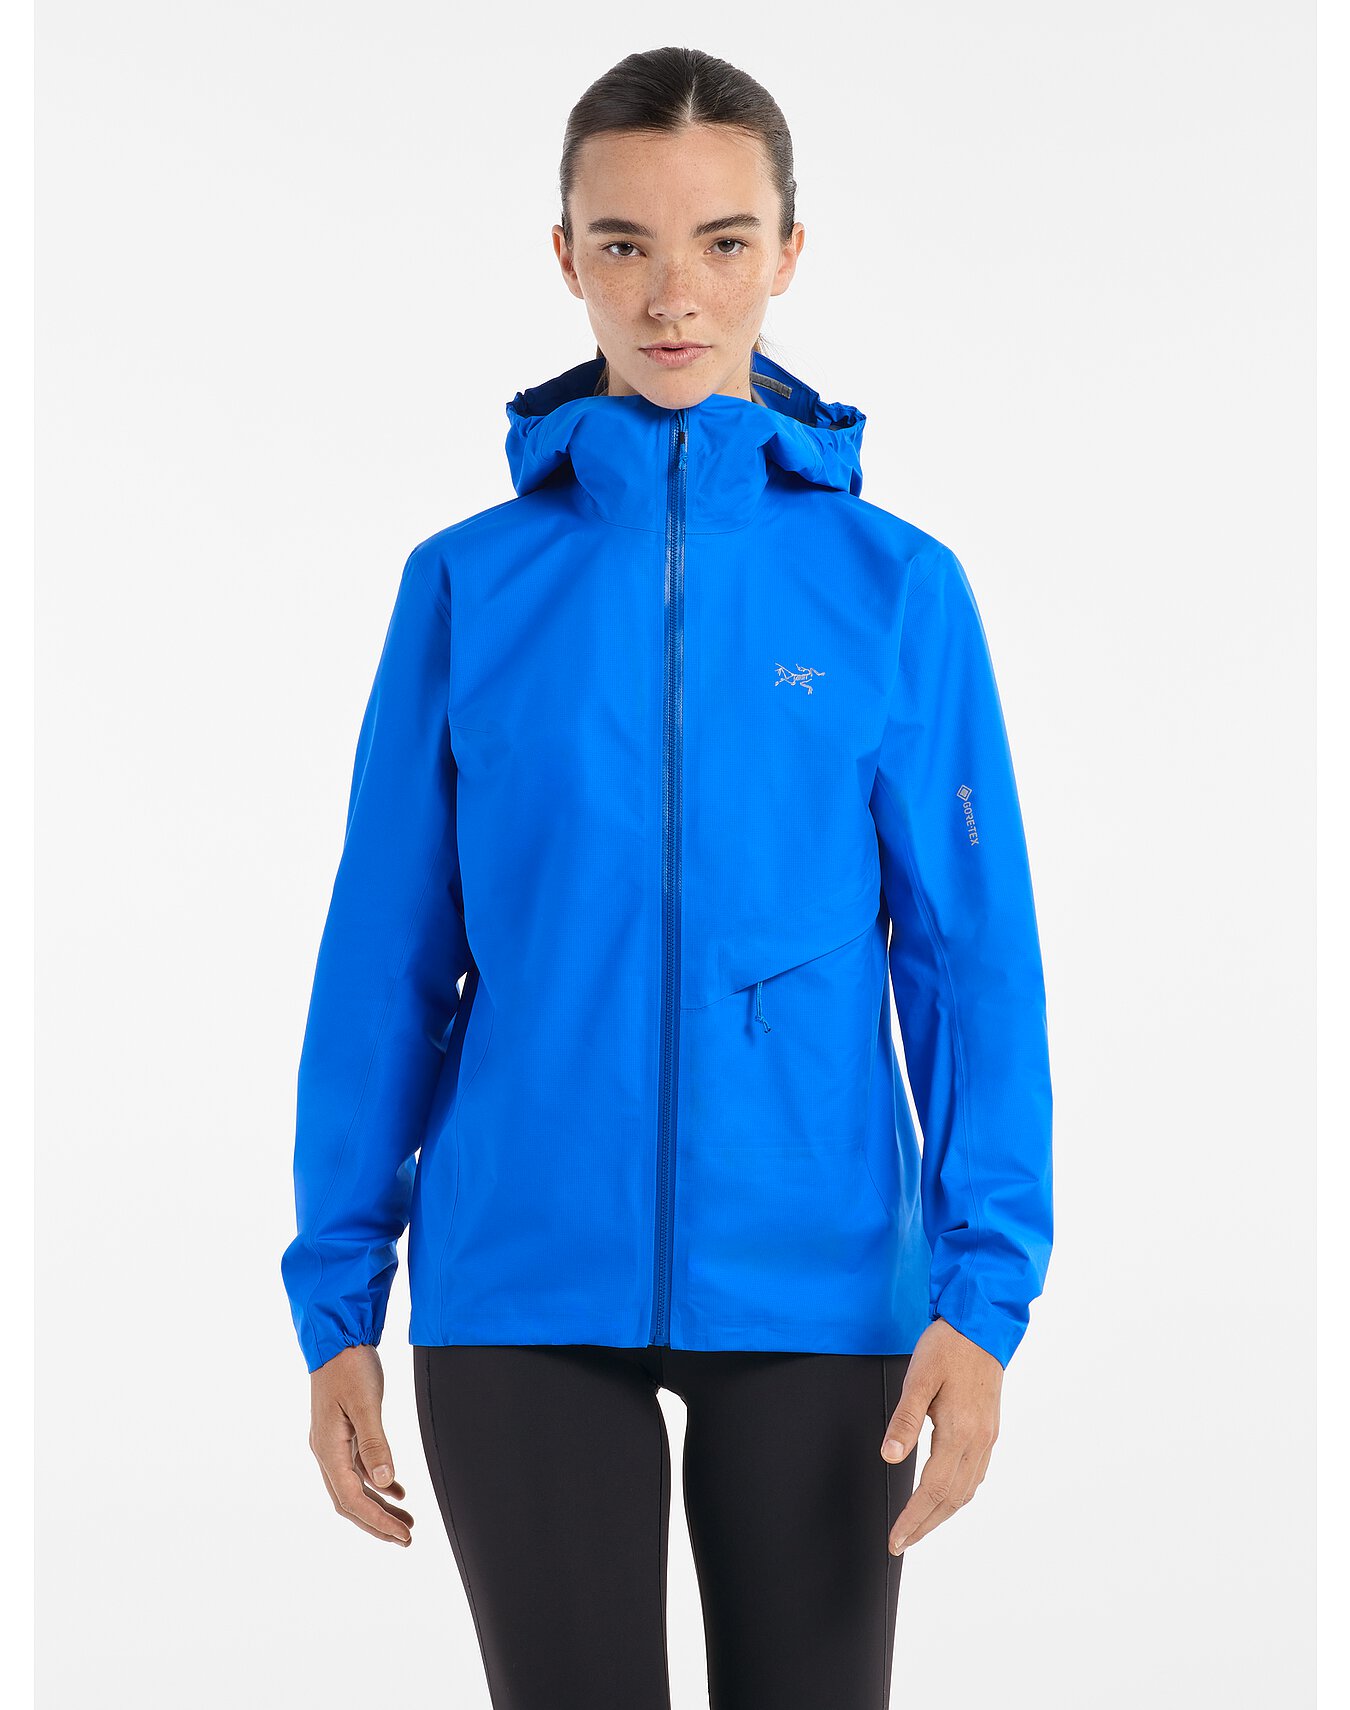 The Best GORE-TEX Jackets | Buyer's Guide | Arc'teryx